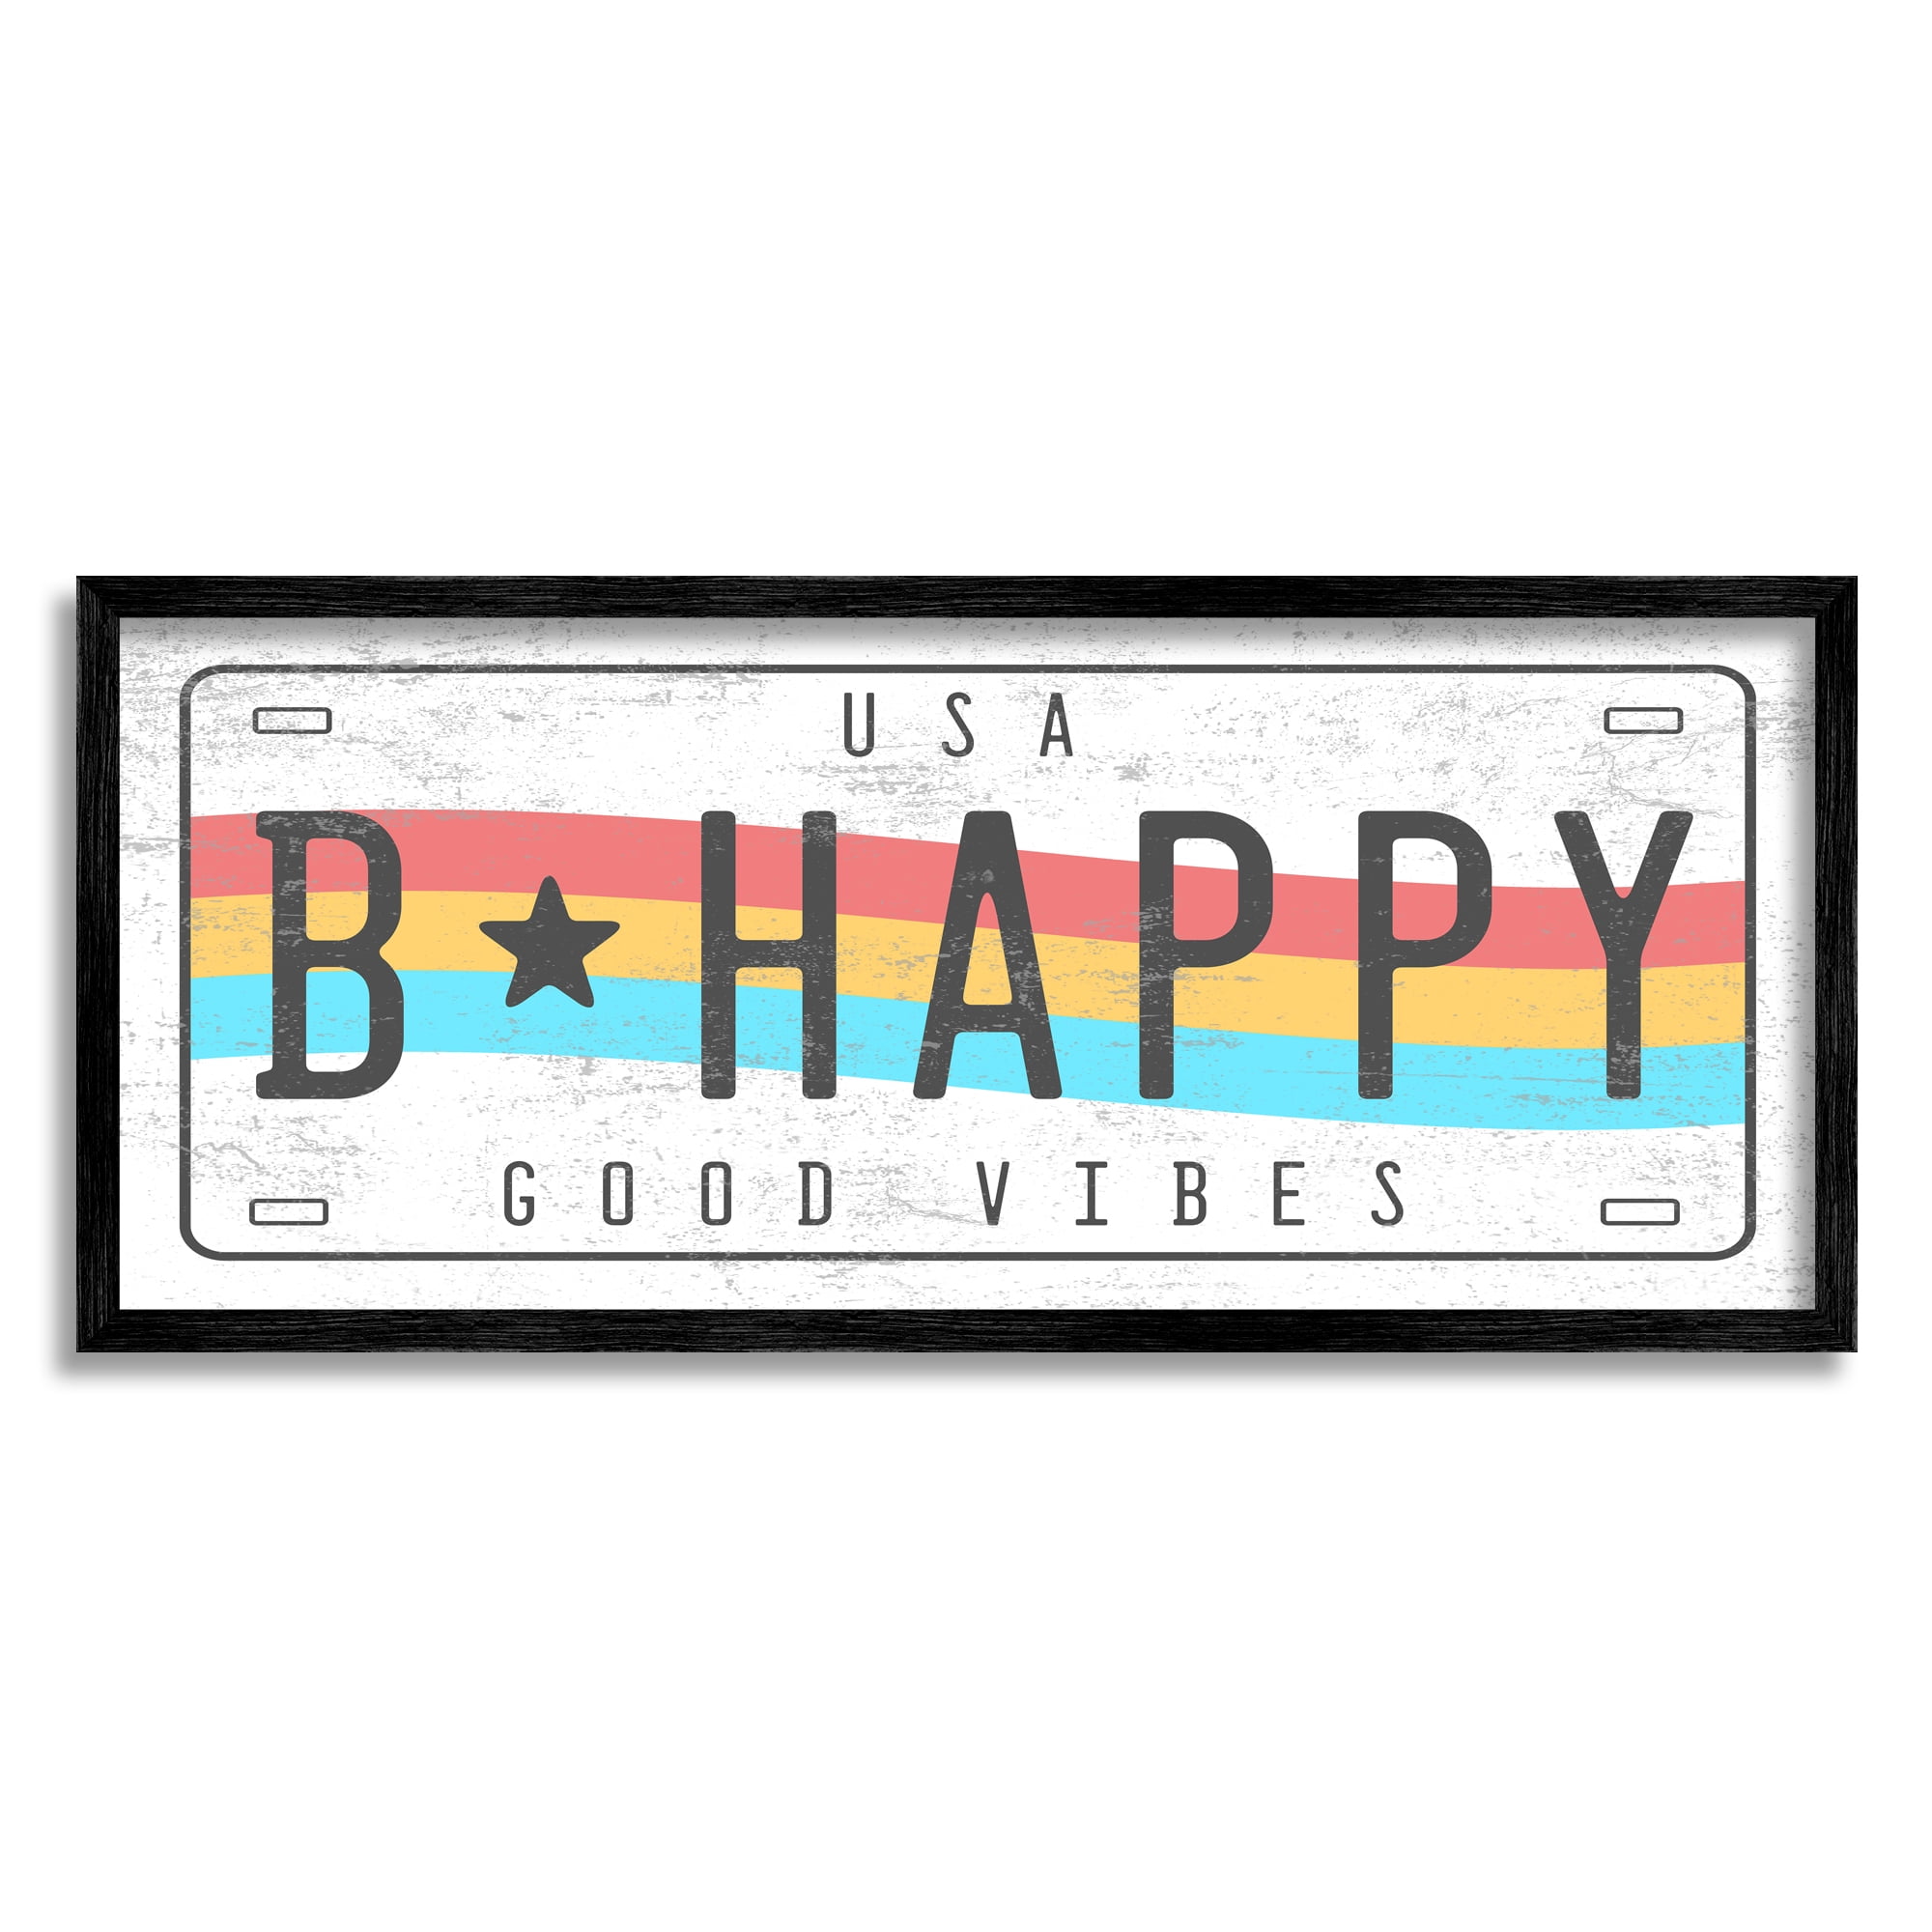 Grey 13 x 30 Stupell Industries B Happy Rainbow License Plate Good Vibes Sentiment Designed by Daphne Polselli Canvas Wall Art